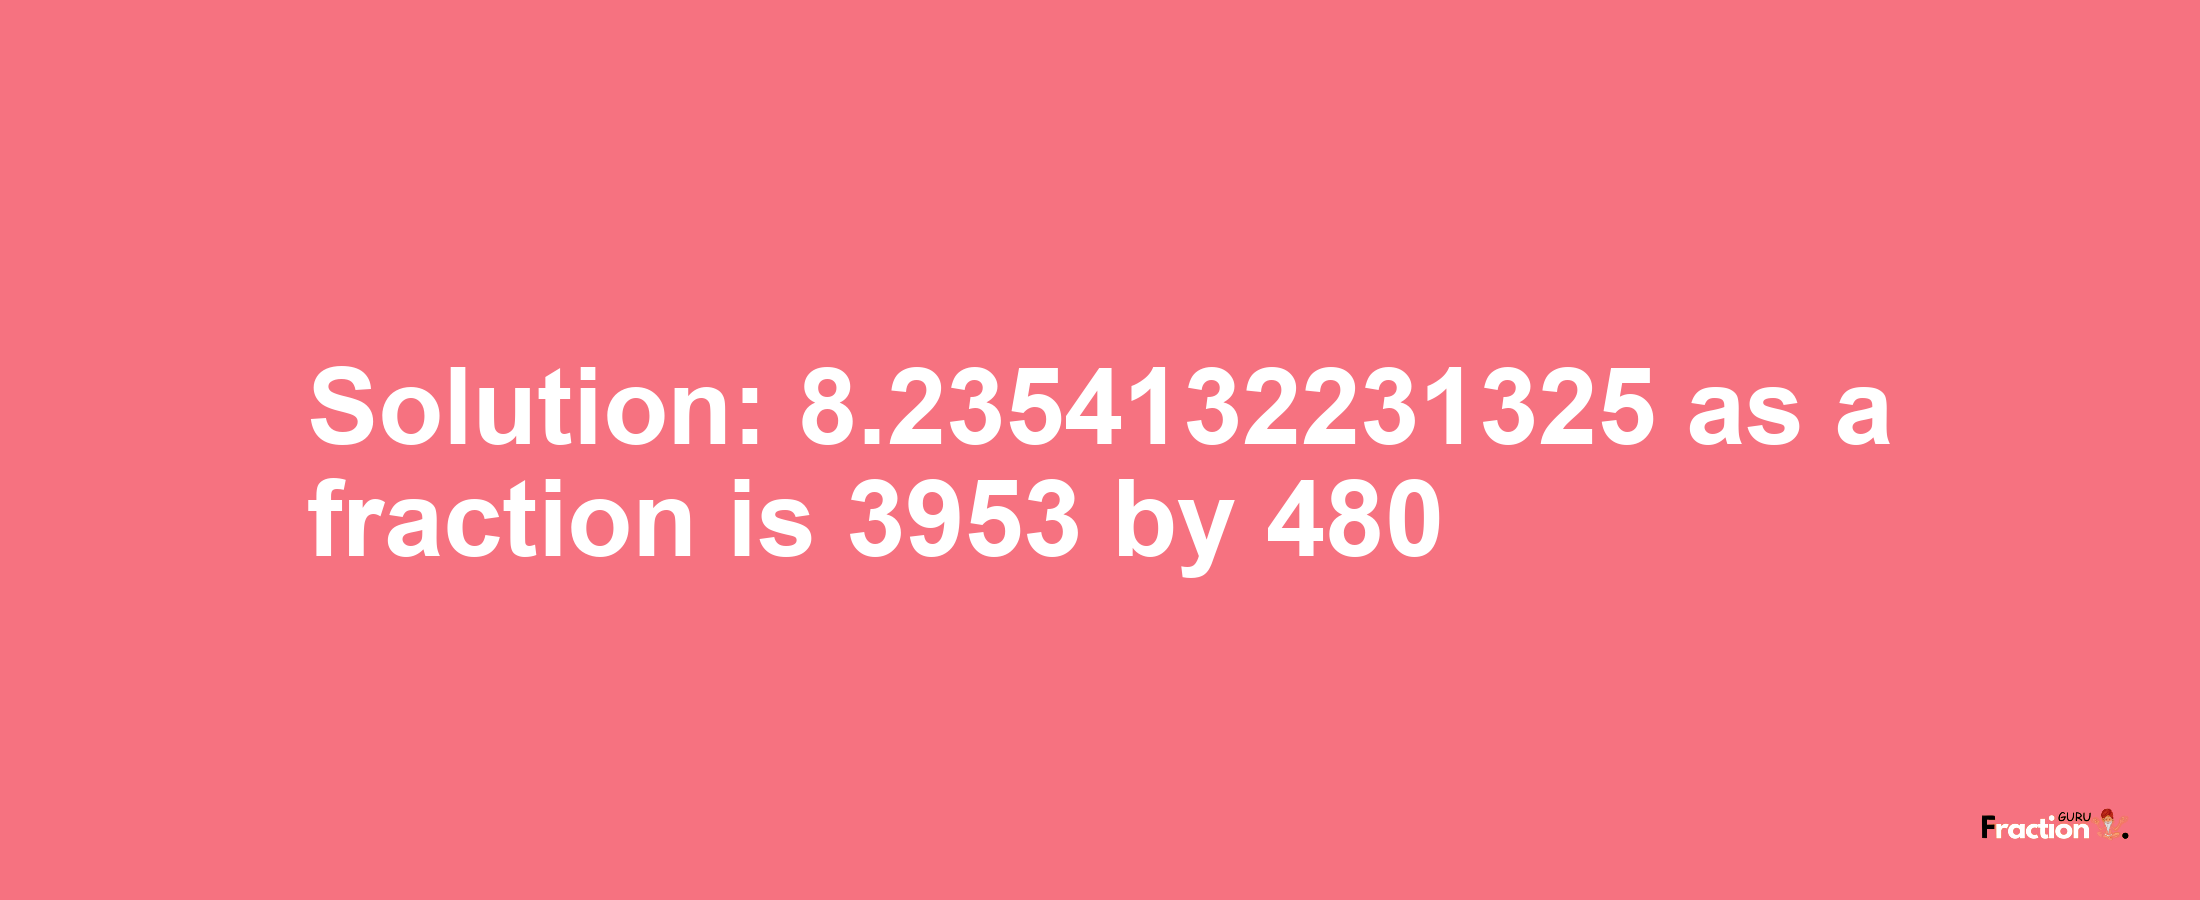 Solution:8.2354132231325 as a fraction is 3953/480